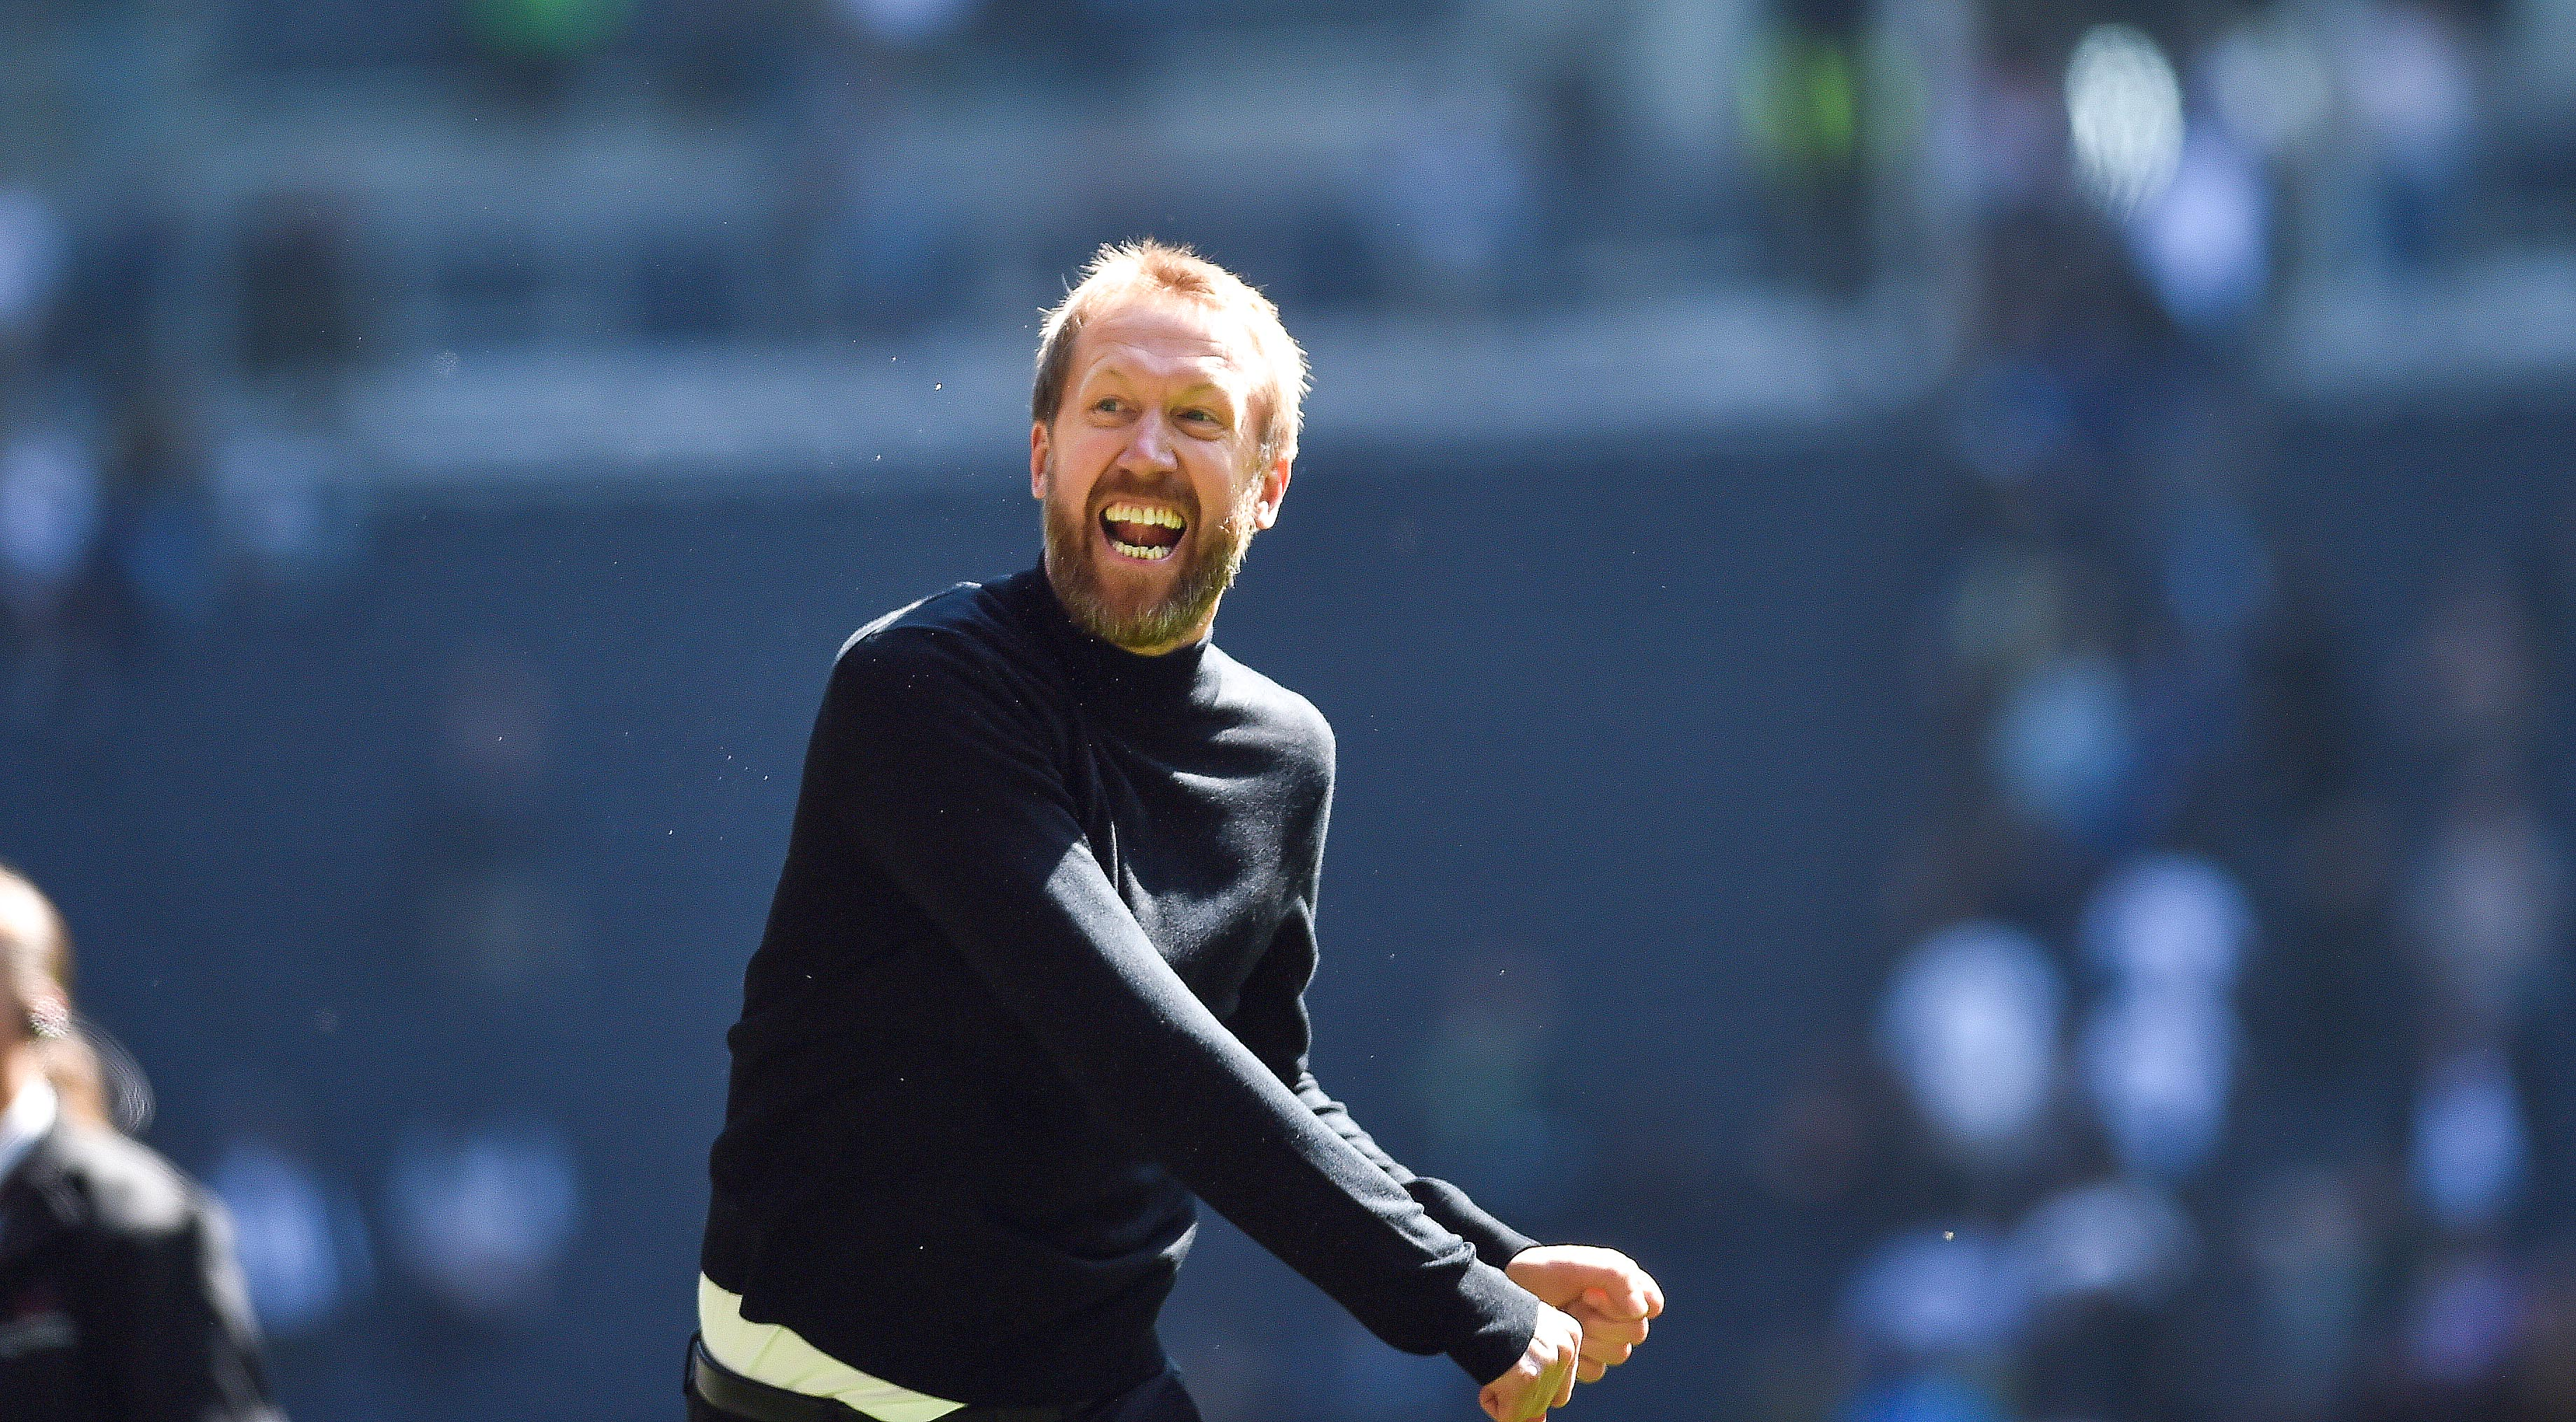 Graham Potter breaks down the Albion tactical plan which took them to ninth place